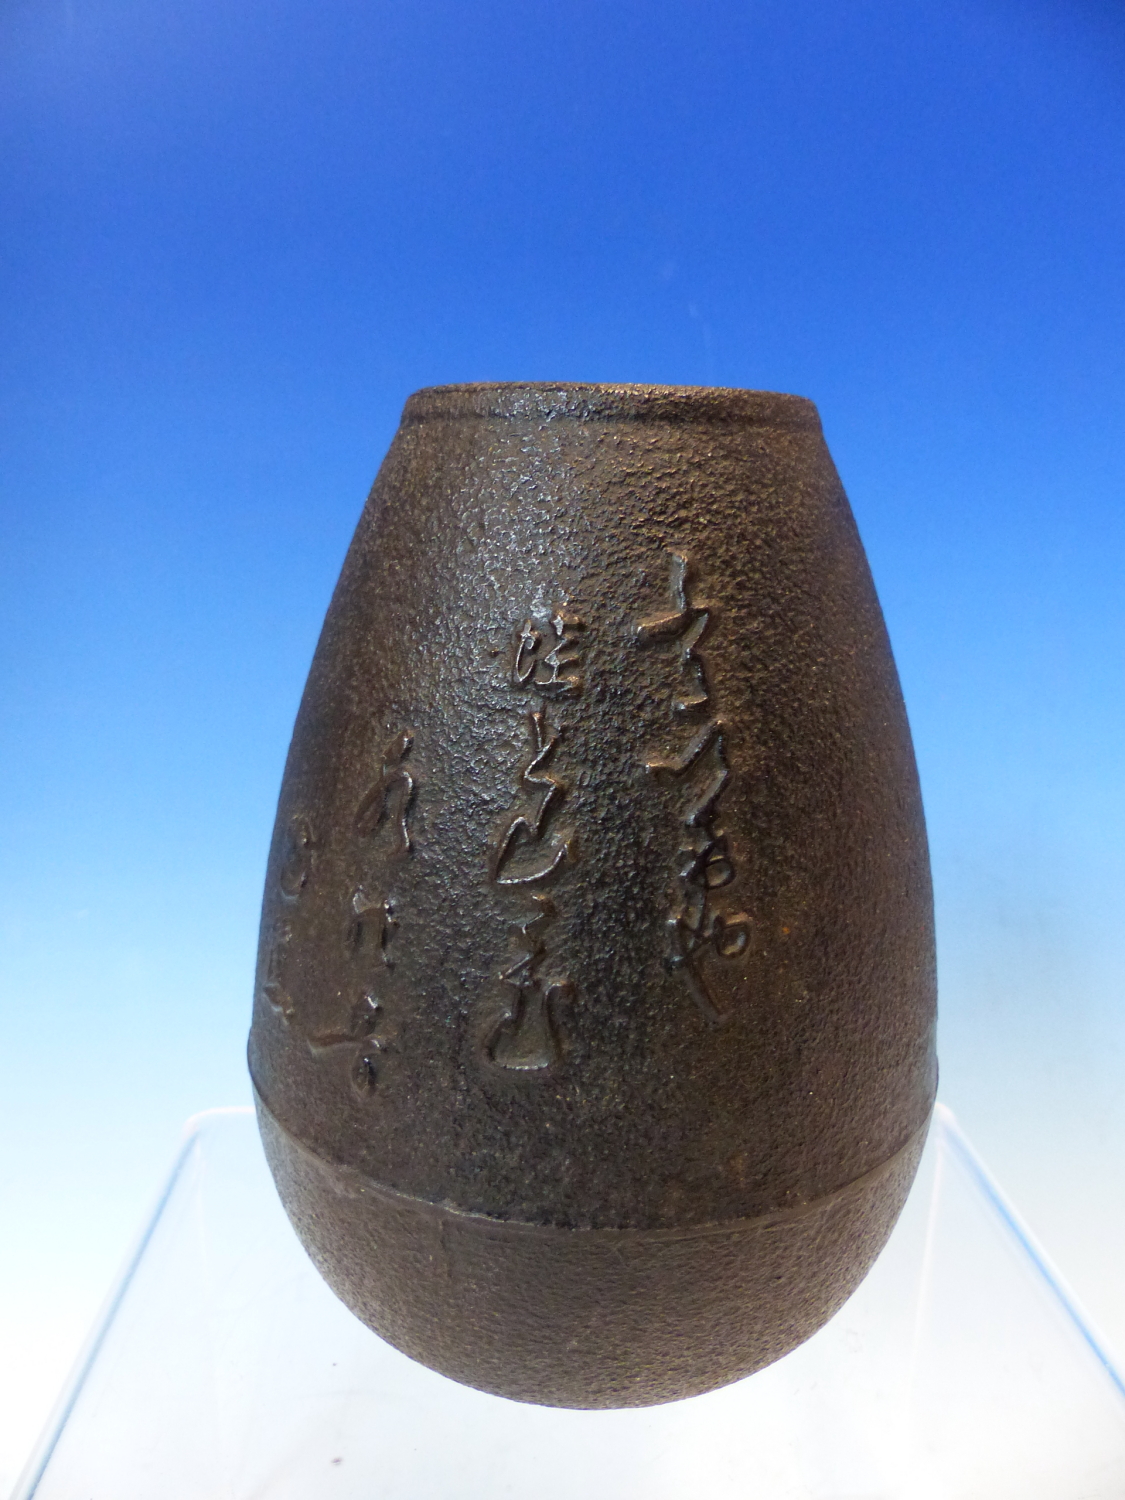 A JAPANESE CAST IRON VASE OF OVOID FORM WITH SCRIPT DECORATION AND SIGNITURE SEAL. 13CM HIGH - Image 6 of 9